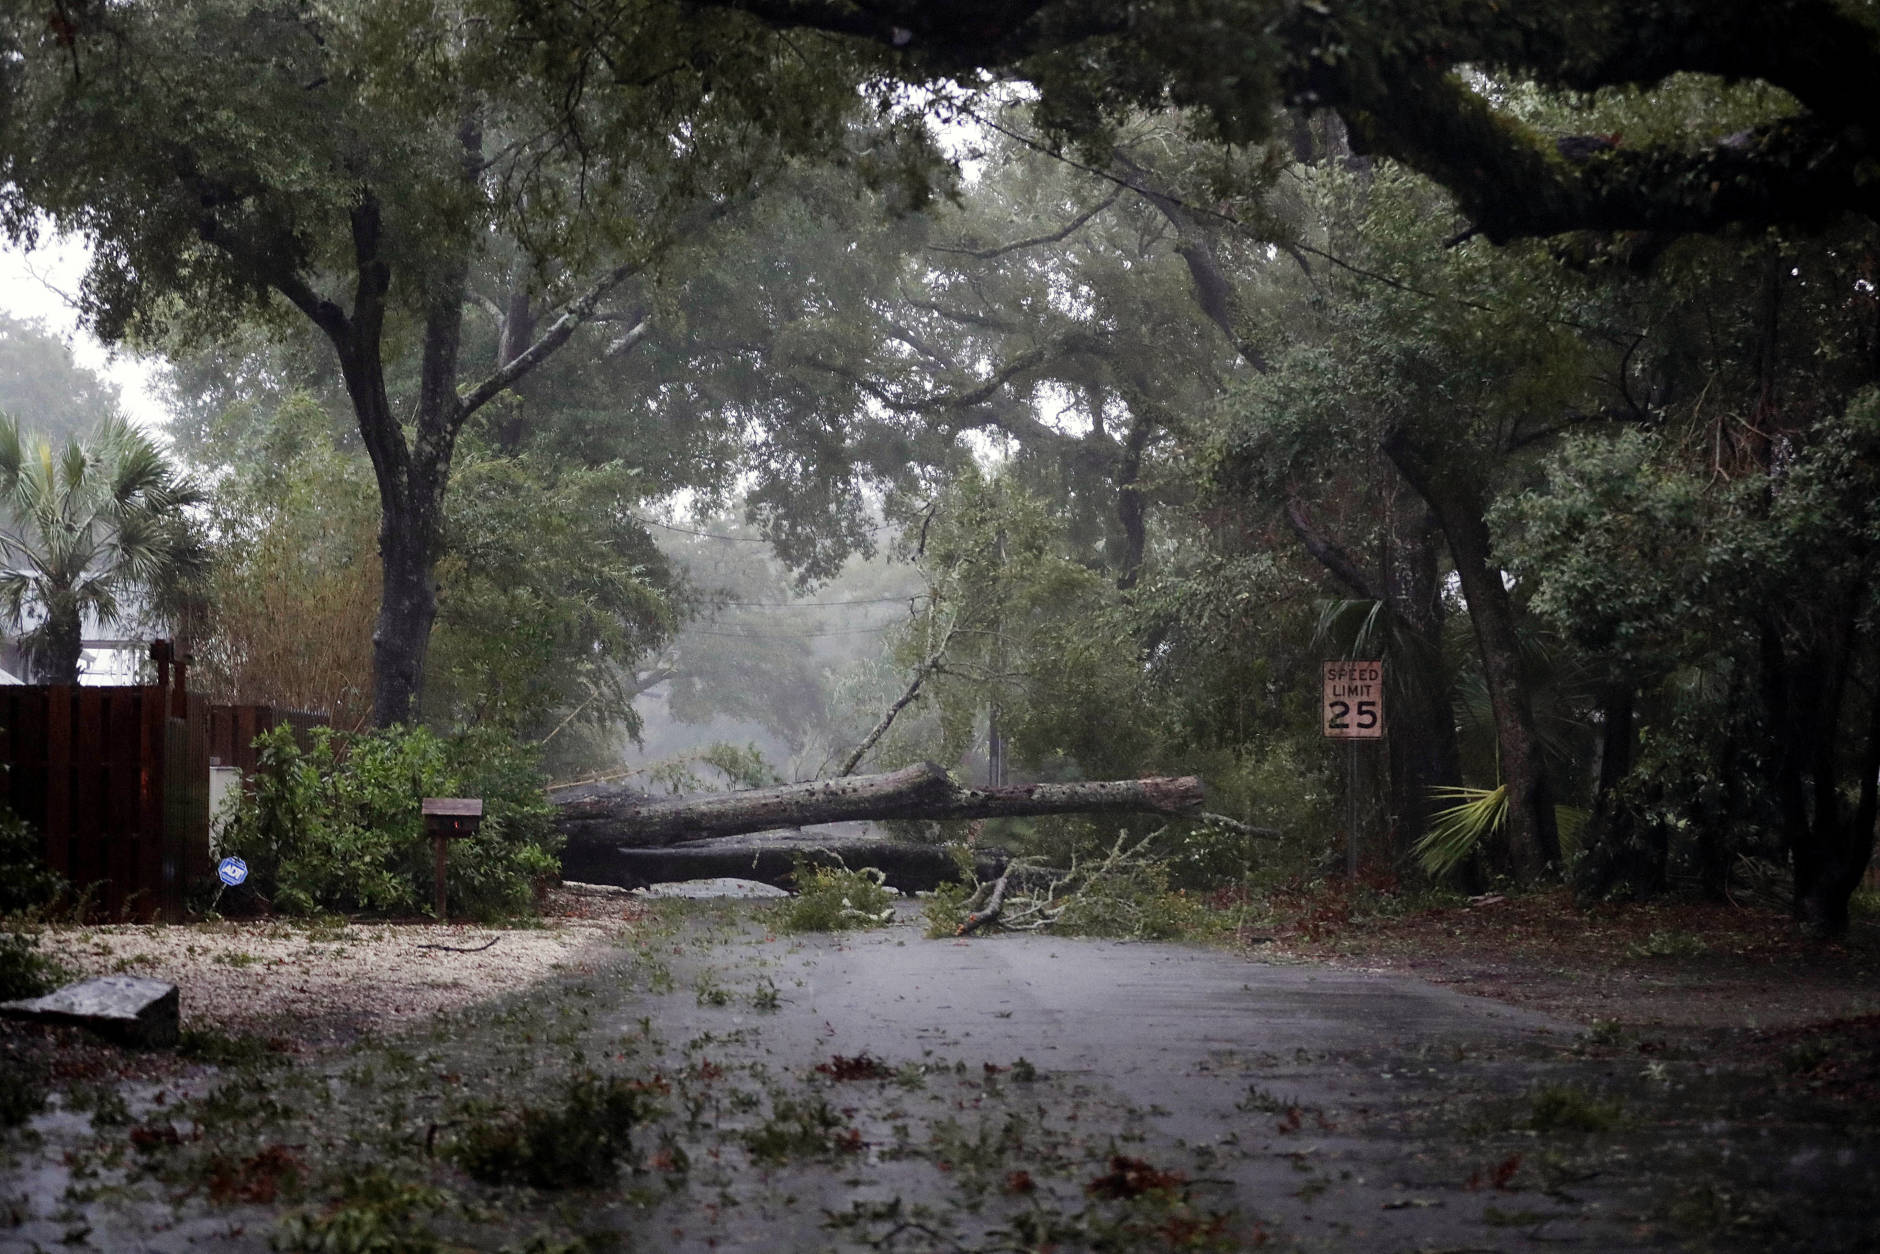 A fallen tree from Hurricane Matthew blocks the road on St. Simons Island, Ga., after residents were ordered to evacuate, Friday, Oct. 7, 2016. (AP Photo/David Goldman)